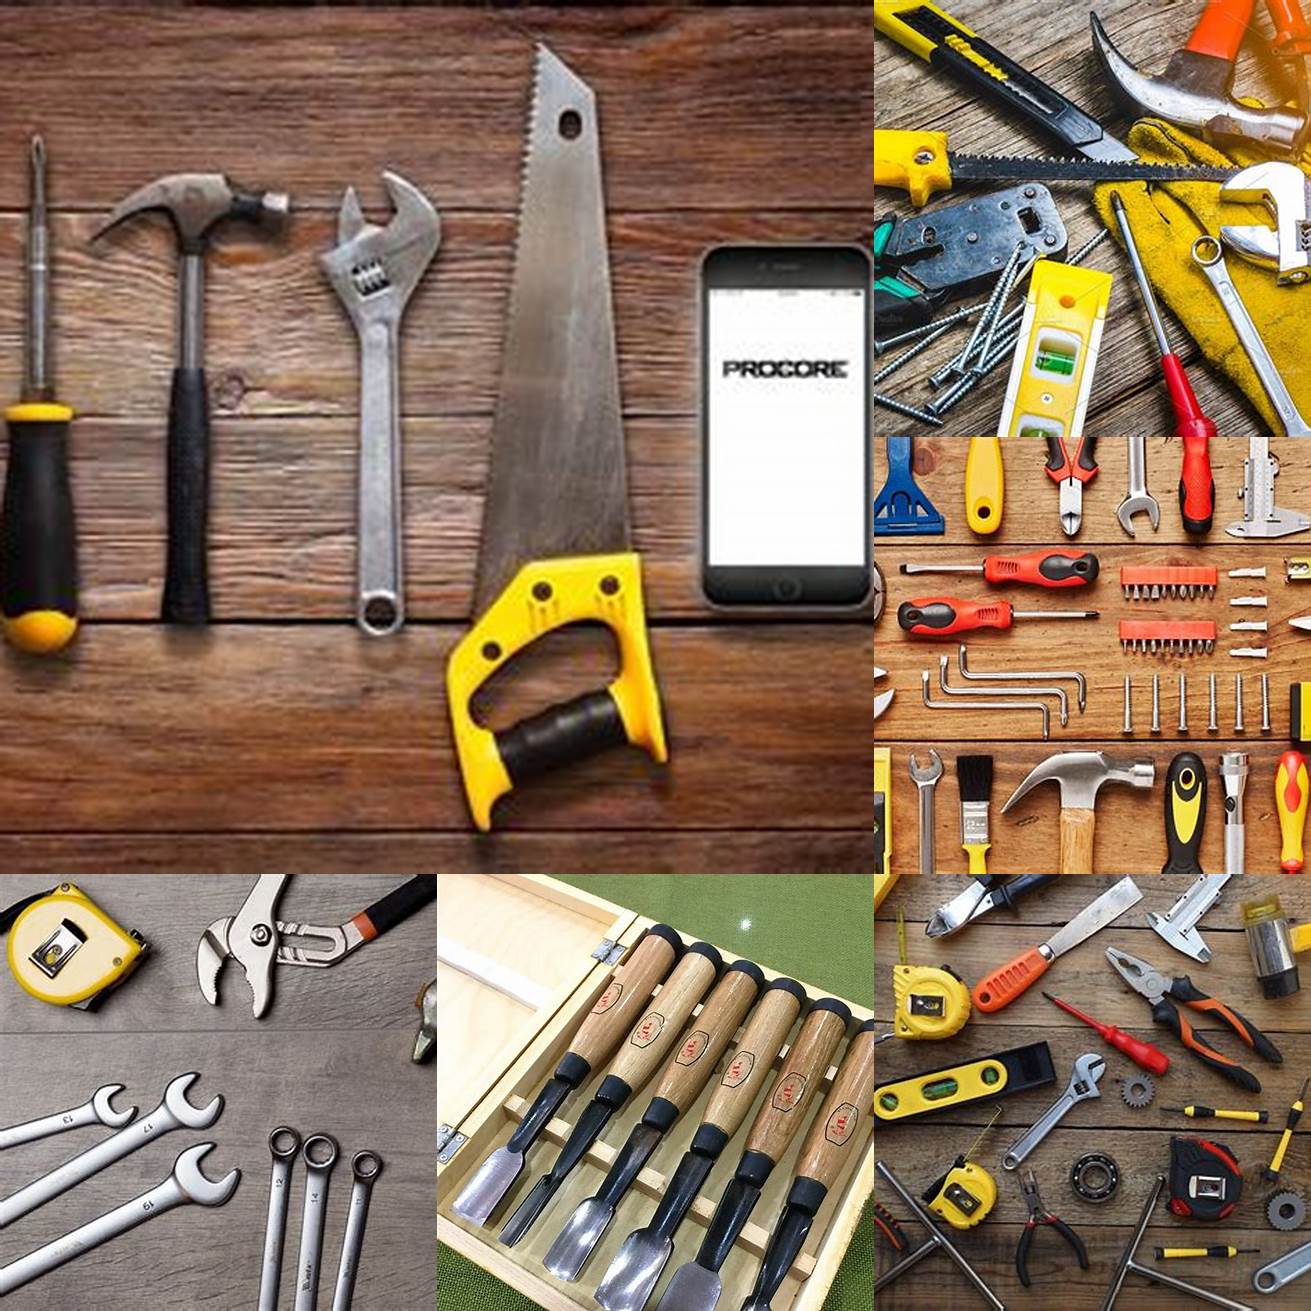 Invest in Quality Tools While tools can be expensive investing in high-quality tools will make the construction process easier and more enjoyable